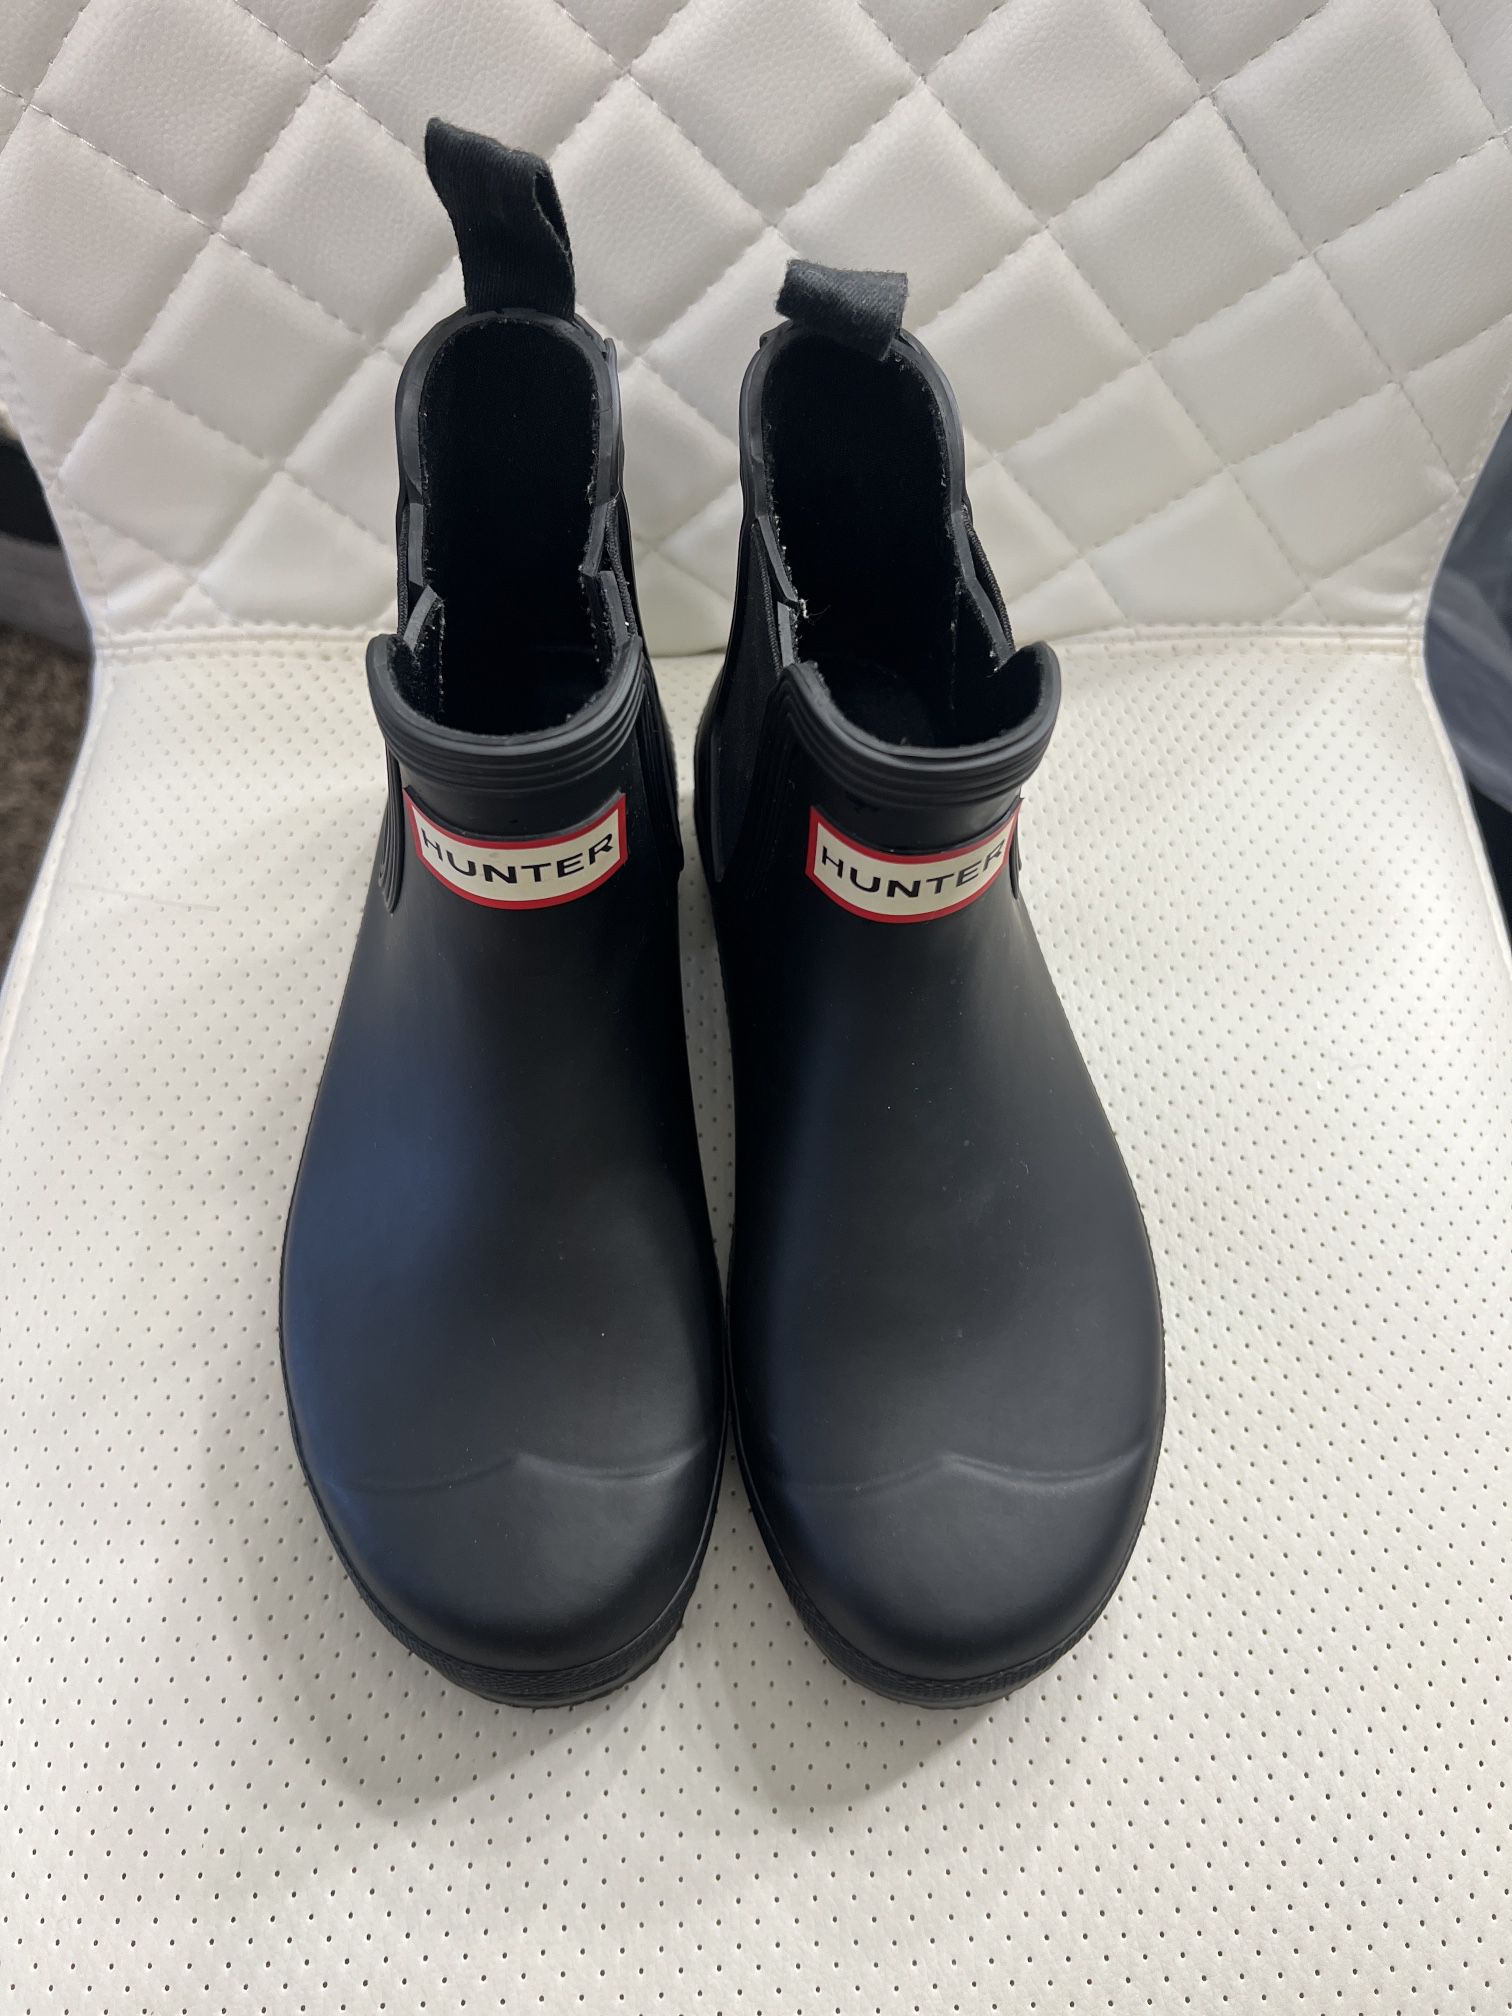 Hunter Chelsea Boots- Size 5